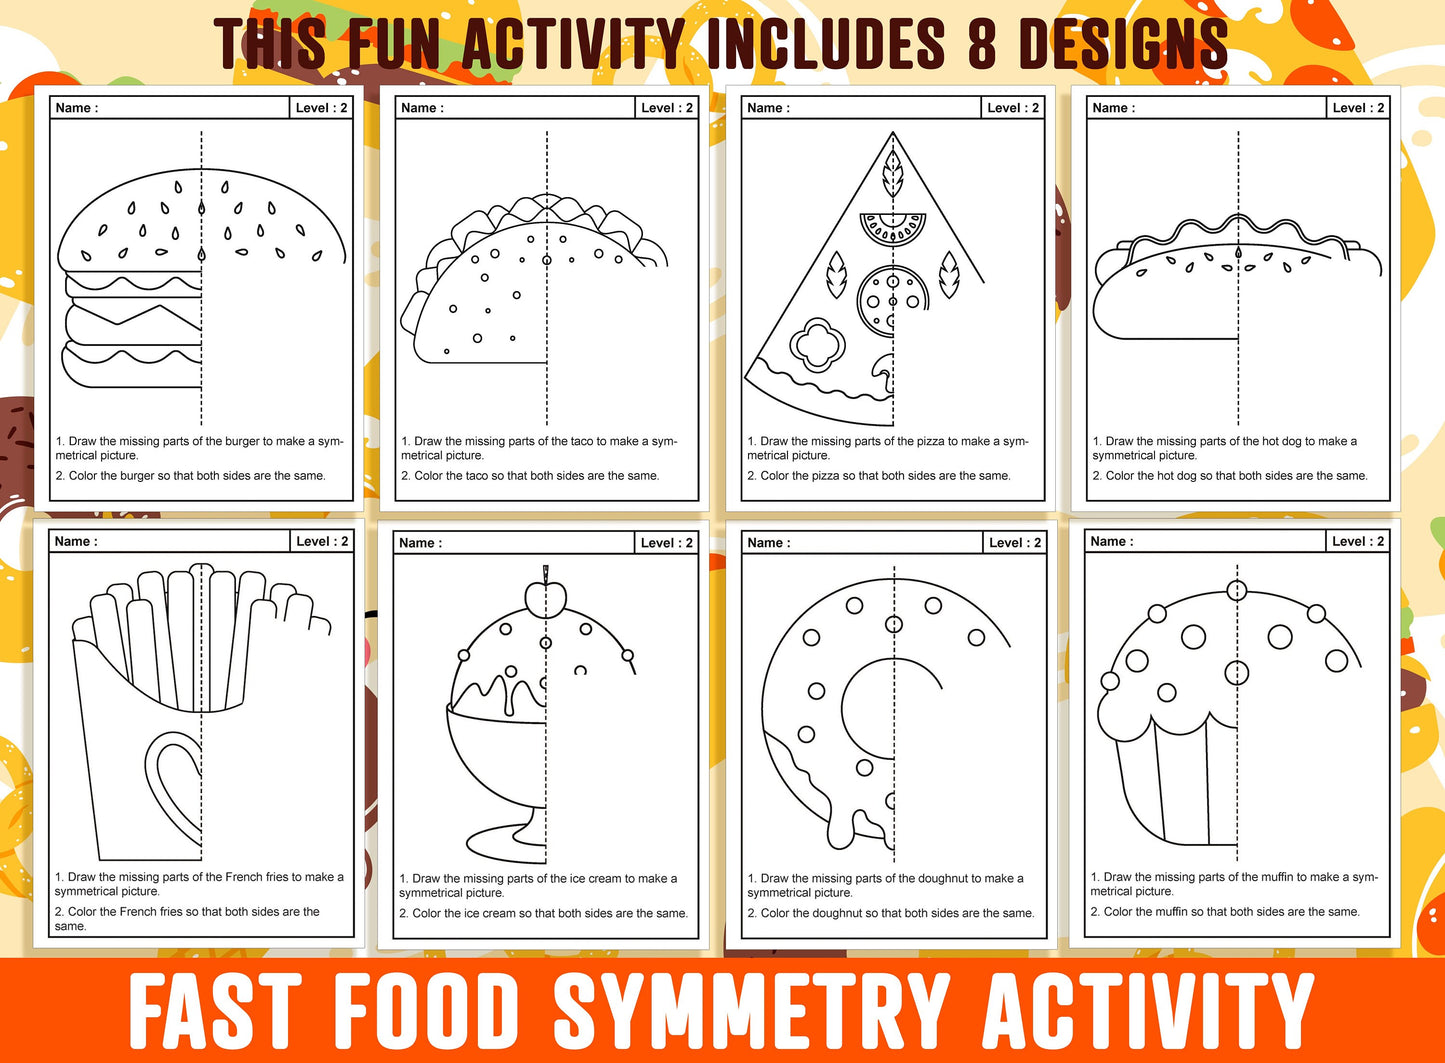 Fast Food Symmetry Worksheet, Fast Food Theme Lines of Symmetry Activity, 24 Pages, Includes 8 Designs, Each With 3 Levels of Difficulty